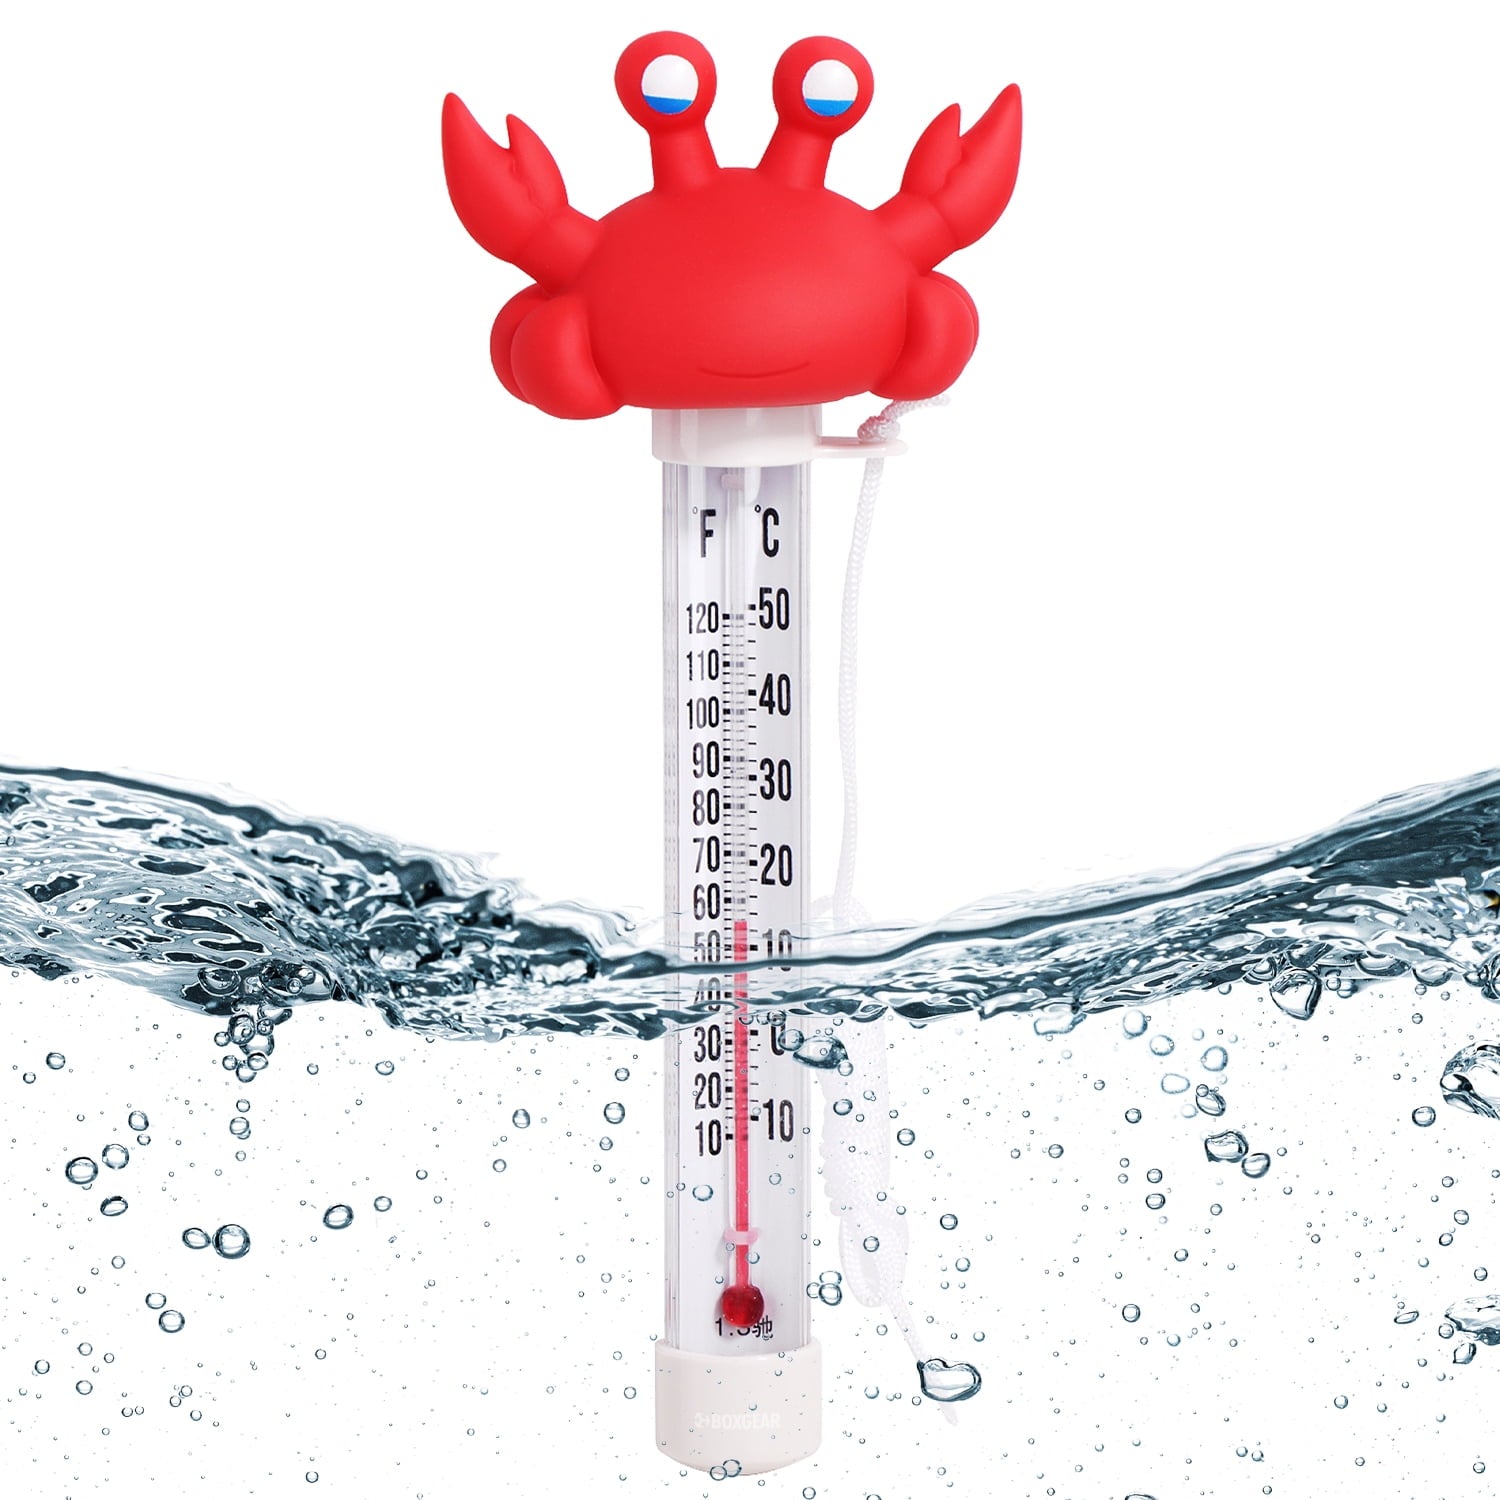 Boxgear Crab Floating Pool Thermometer - Aquarium Thermometer Water Temperature from -10 to 50°C - Shatter Proof Pool Thermometer Floater with Tether for Outdoor & Indoor Swimming Pools, Ponds,Spa